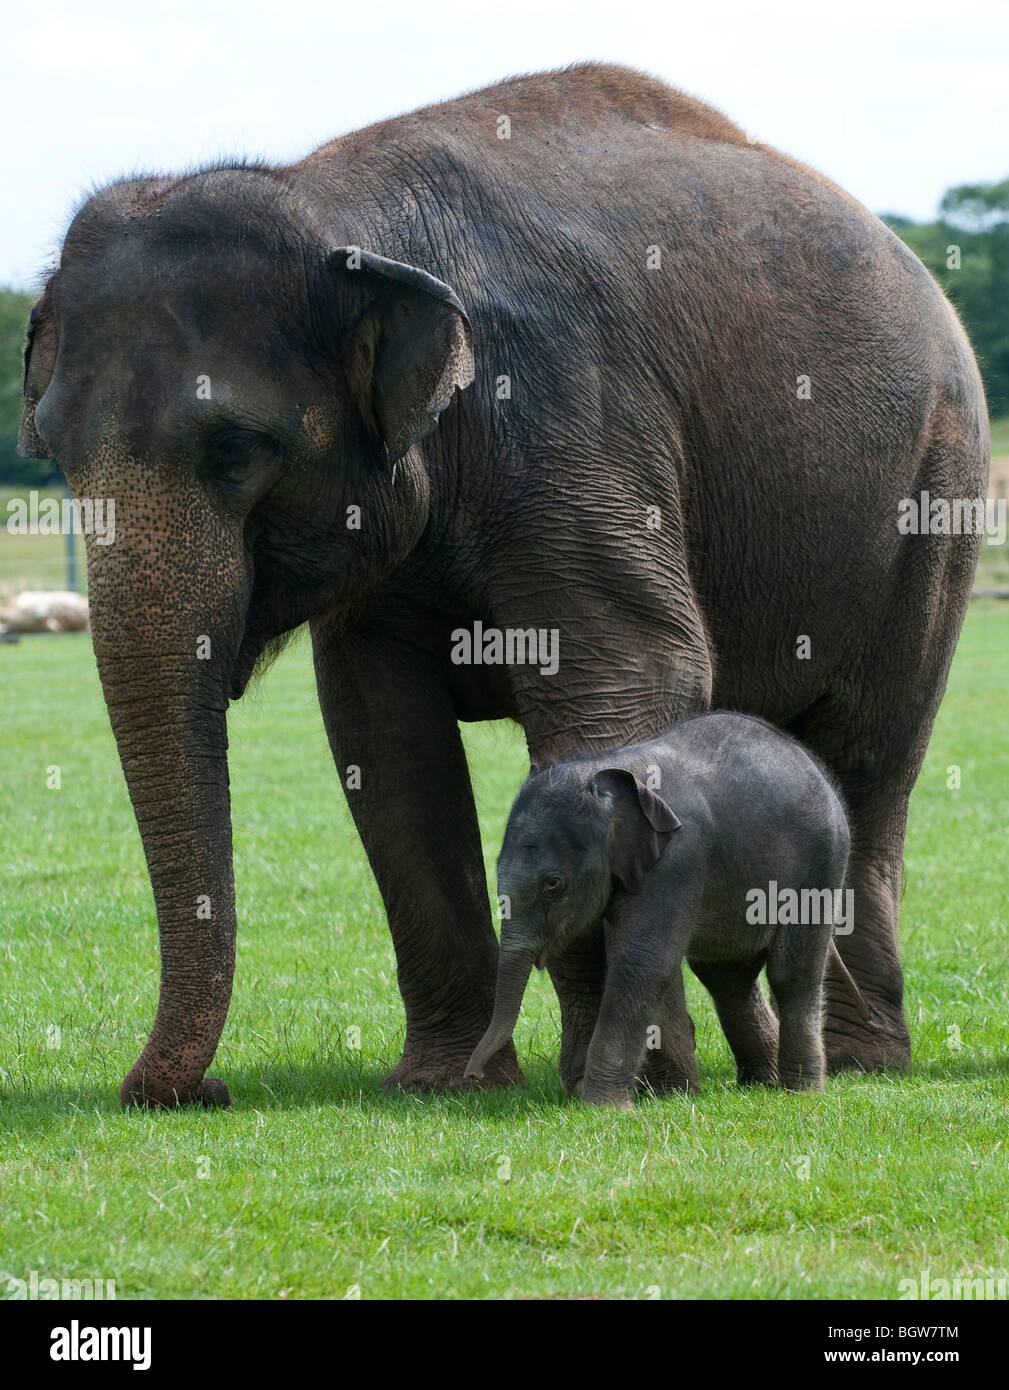 Asian elephant mother and calf Stock Photo